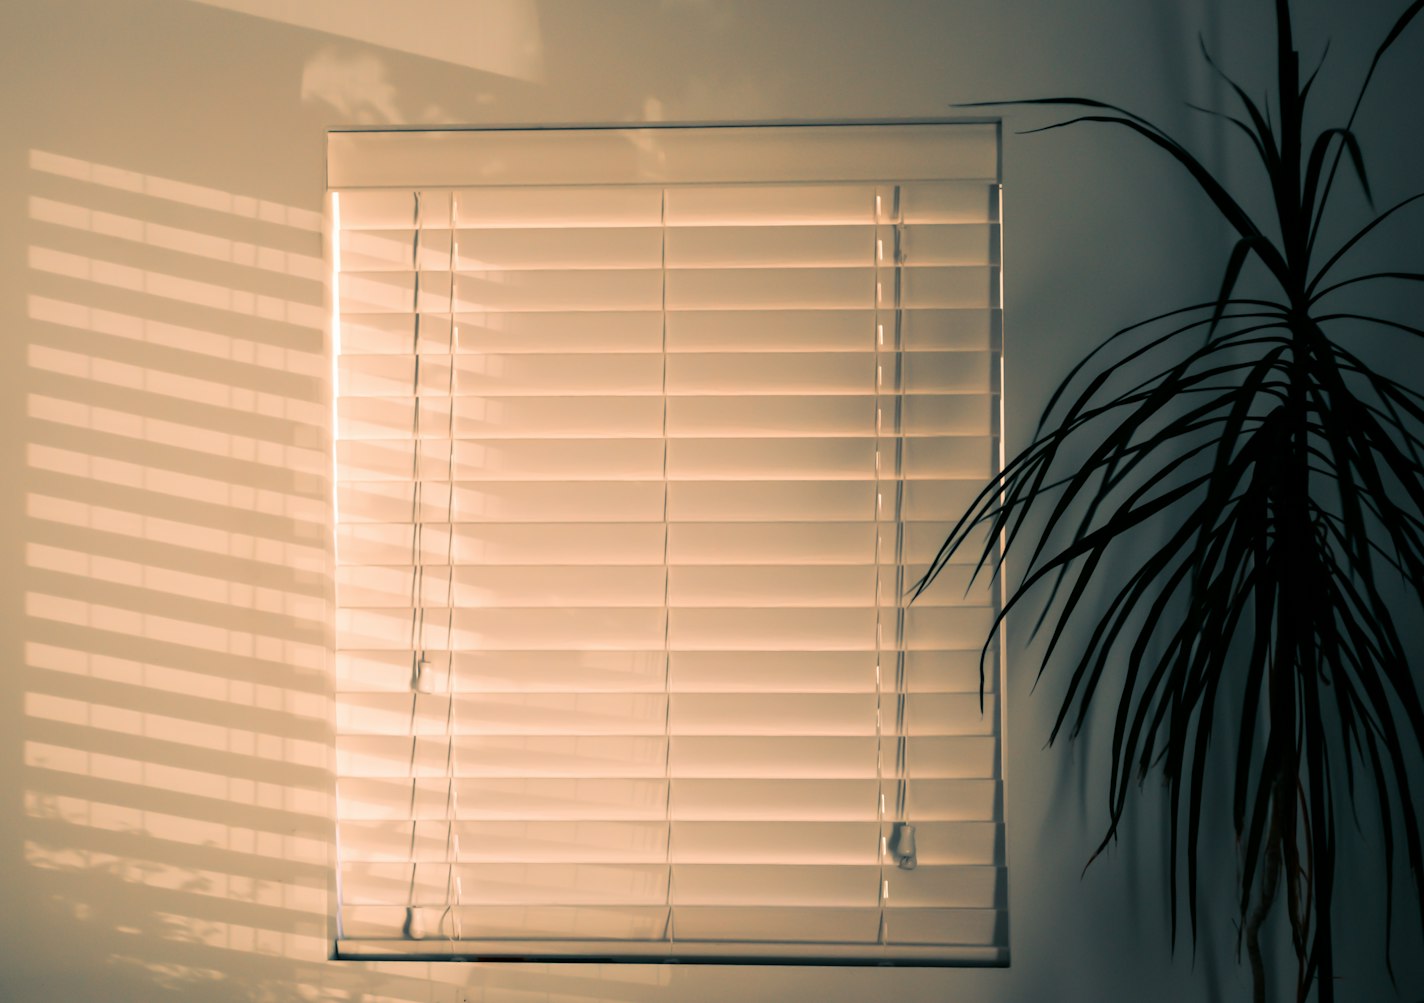 How To Install Window Blinds Without Drilling (3 Easy Ways)